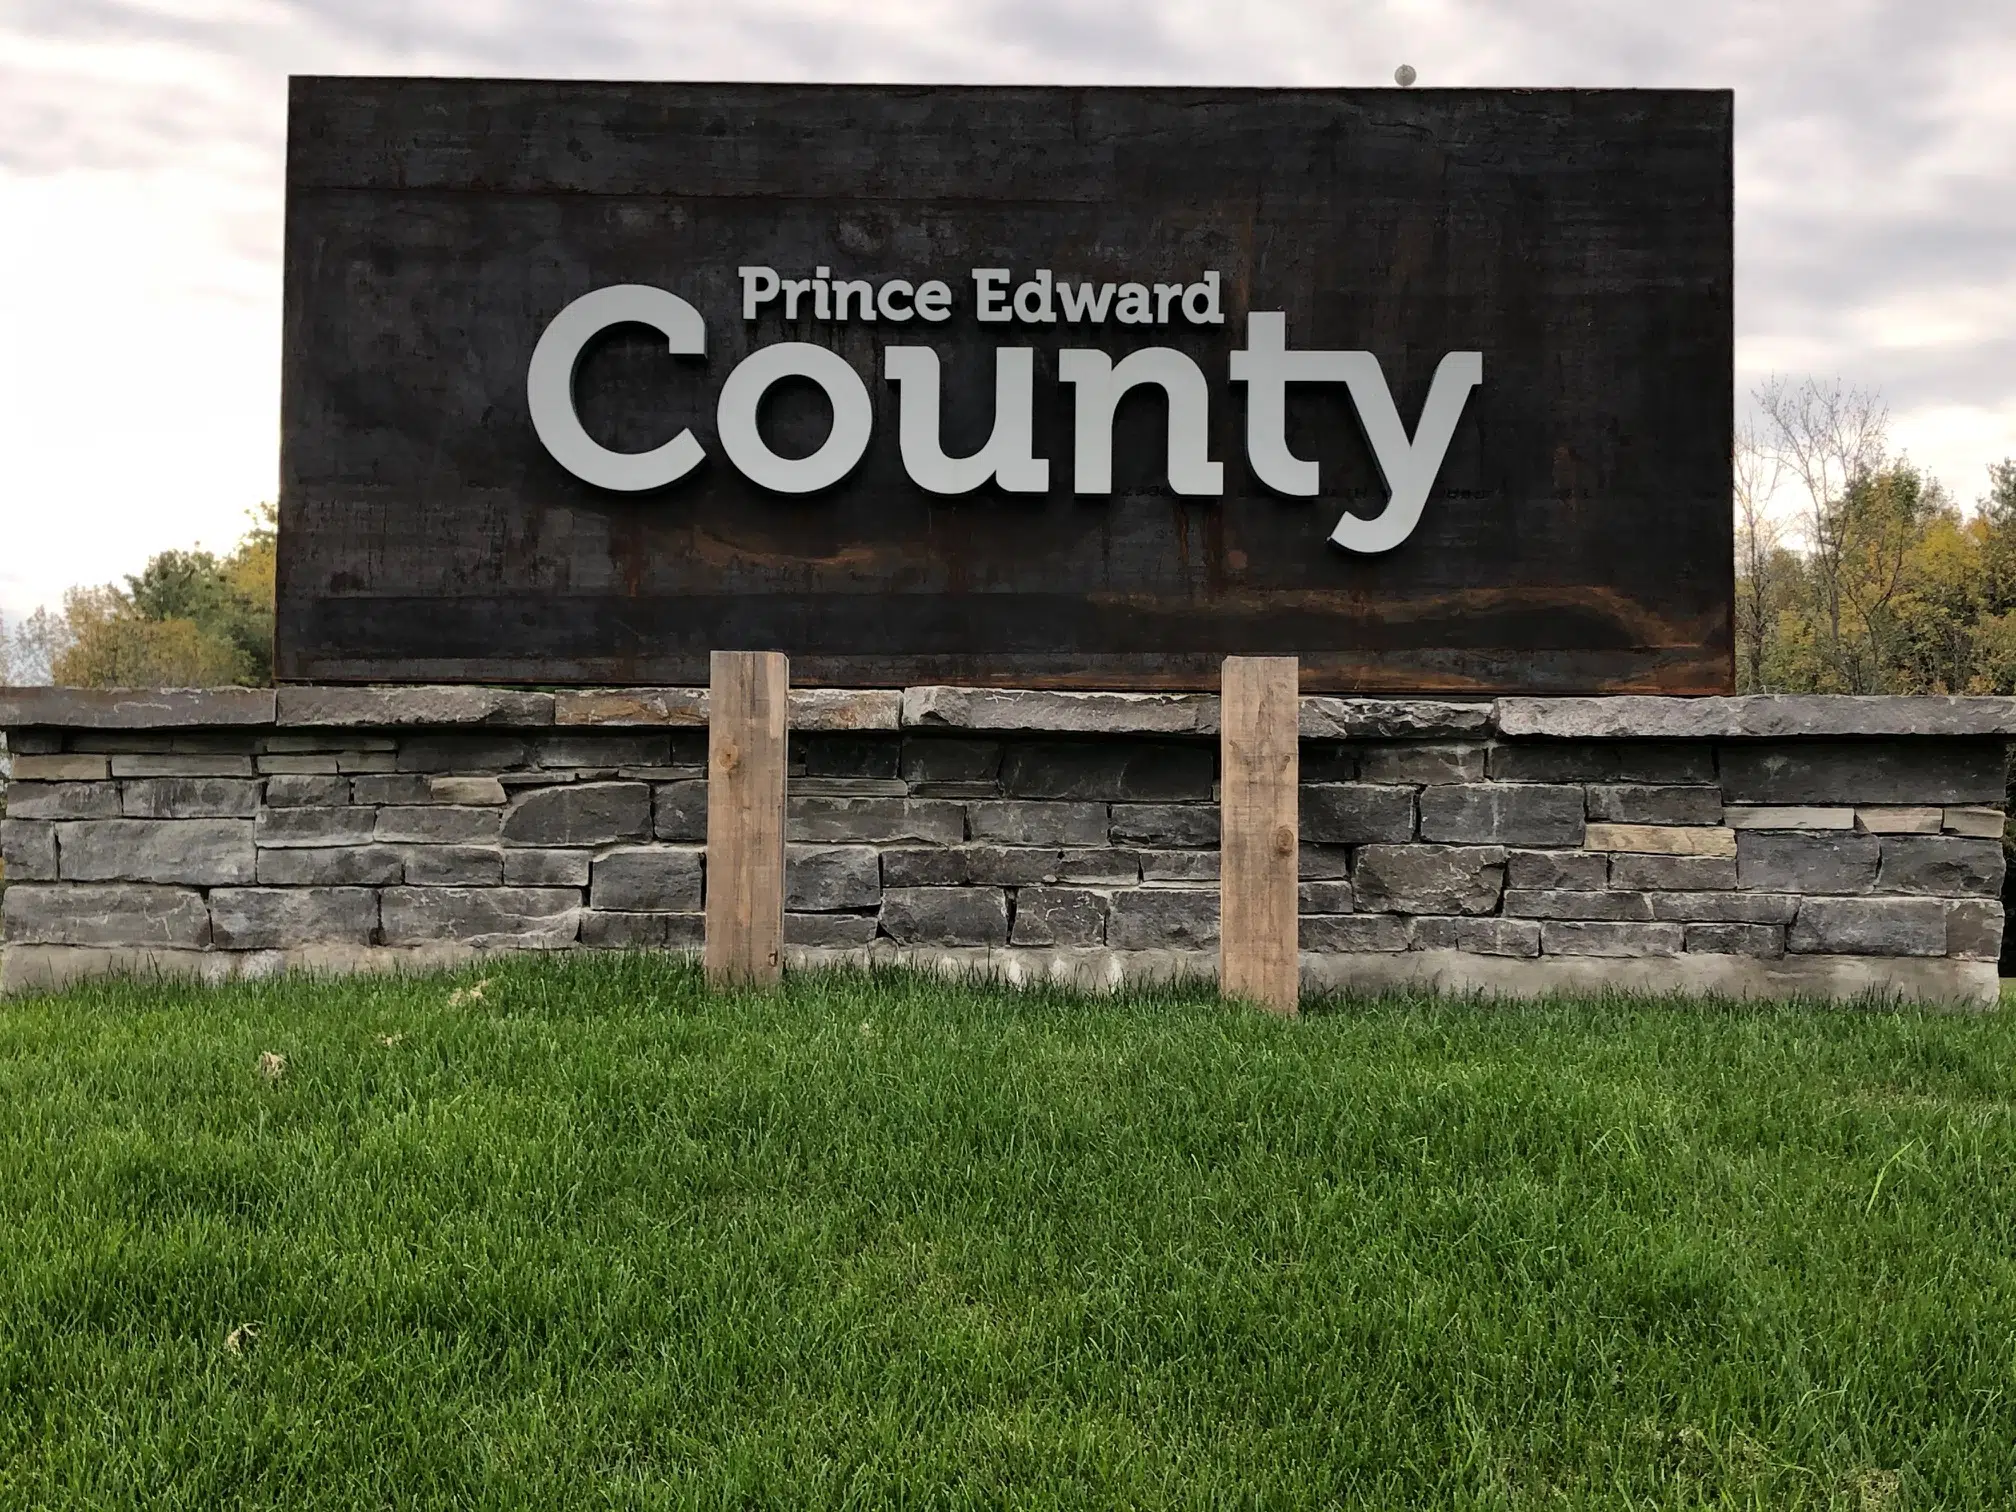 Prince Edward County seeks funding for housing.